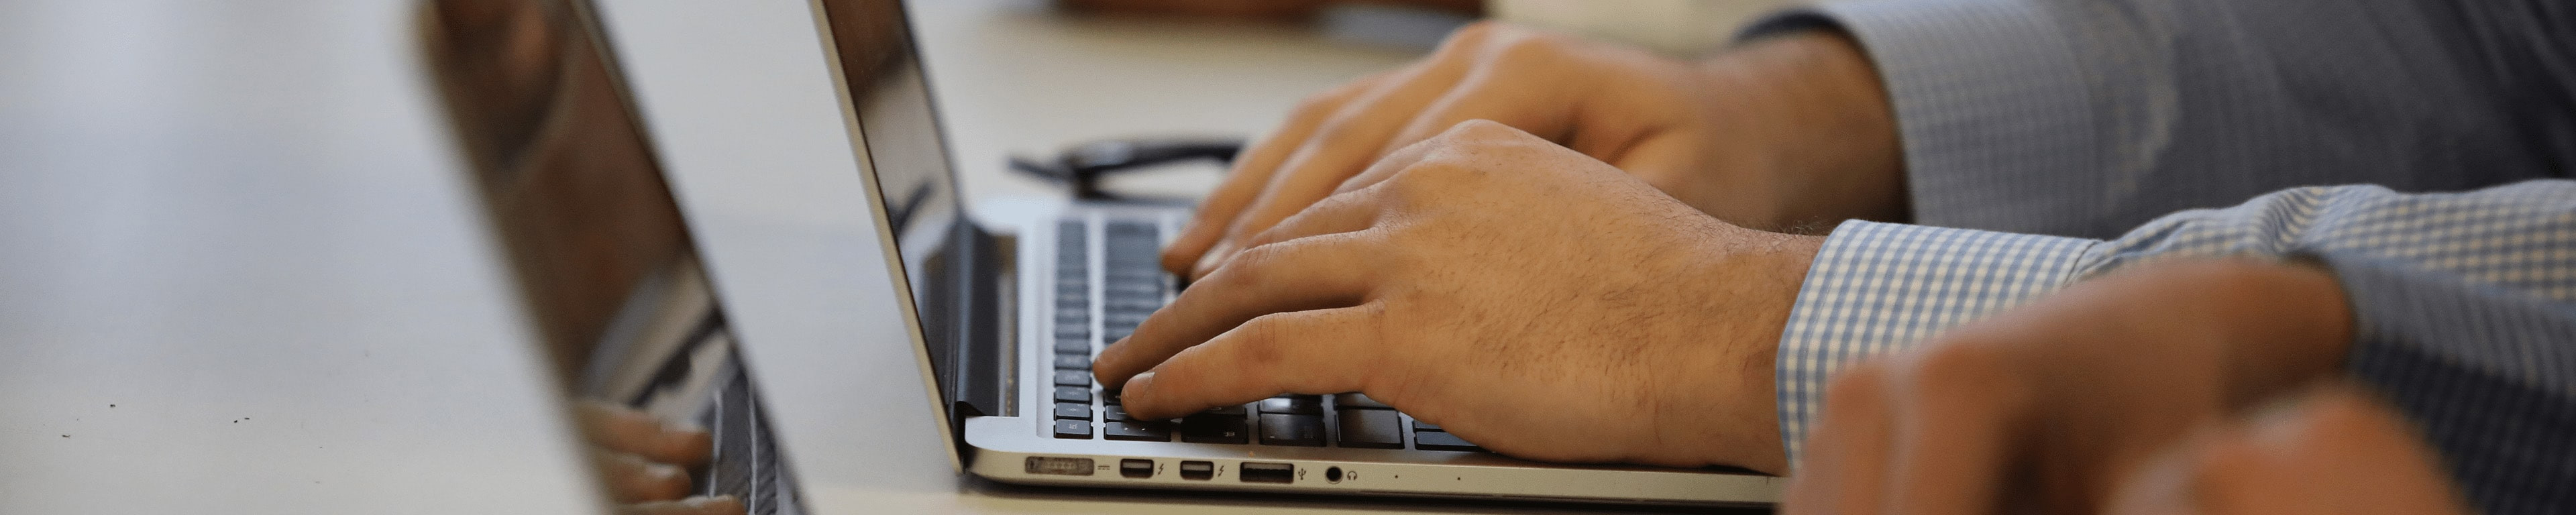 Hands on a laptop computer